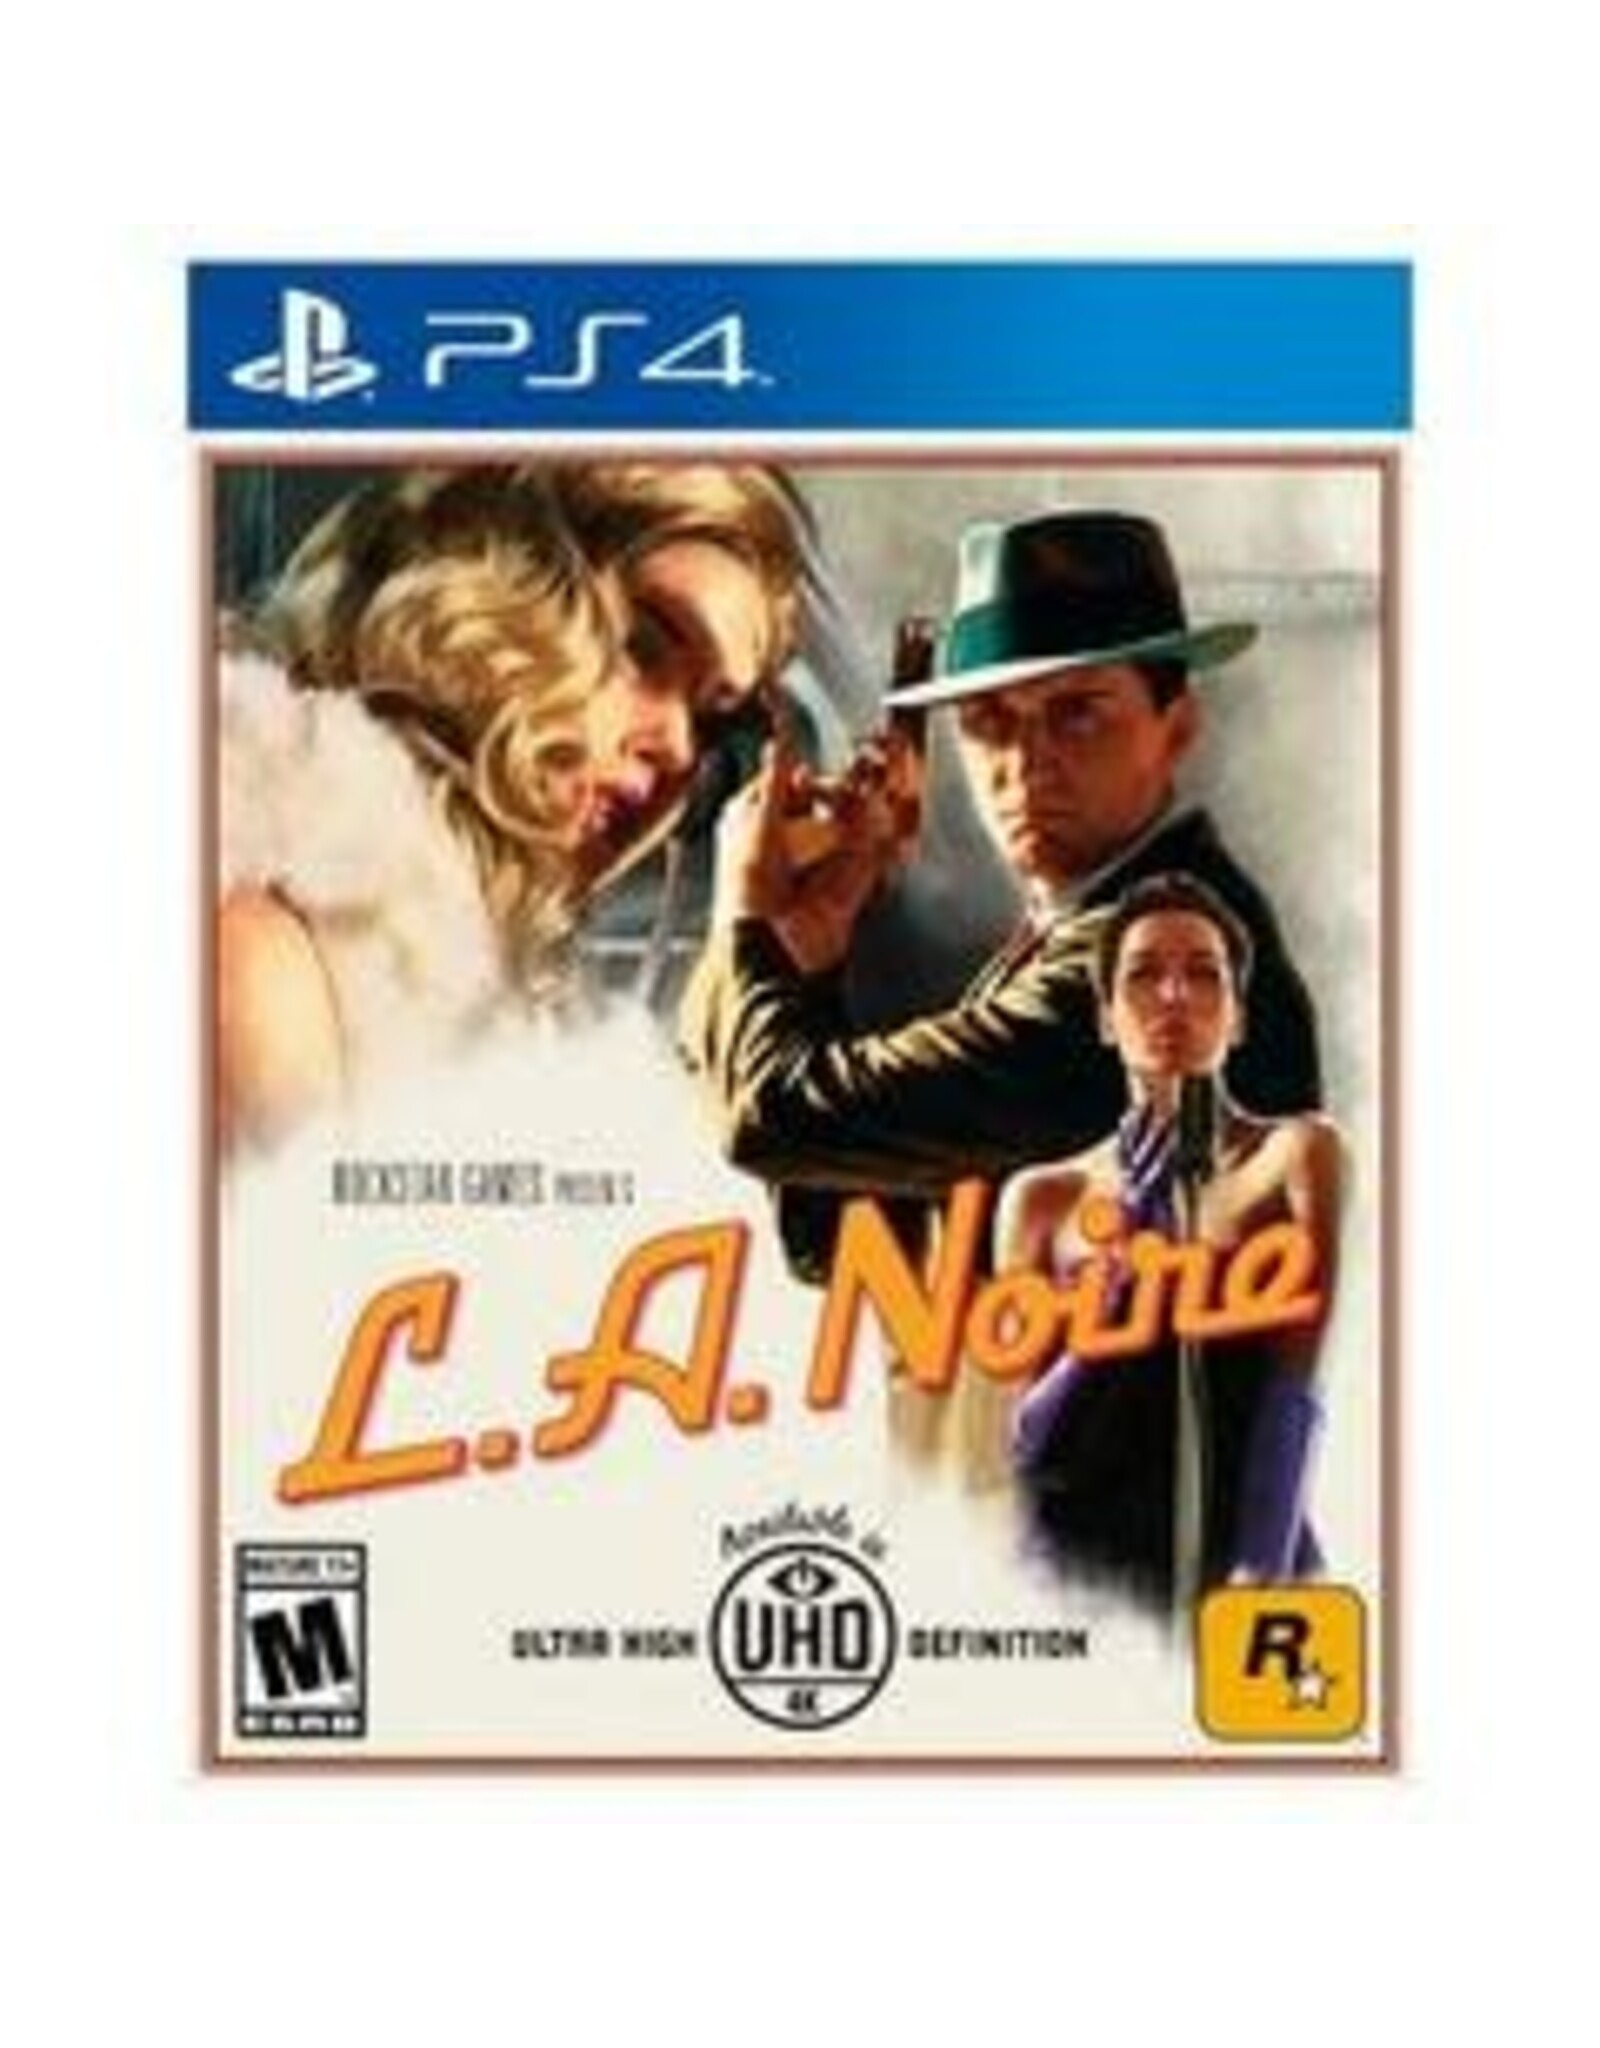 Playstation 4 L.A. Noire (Used)